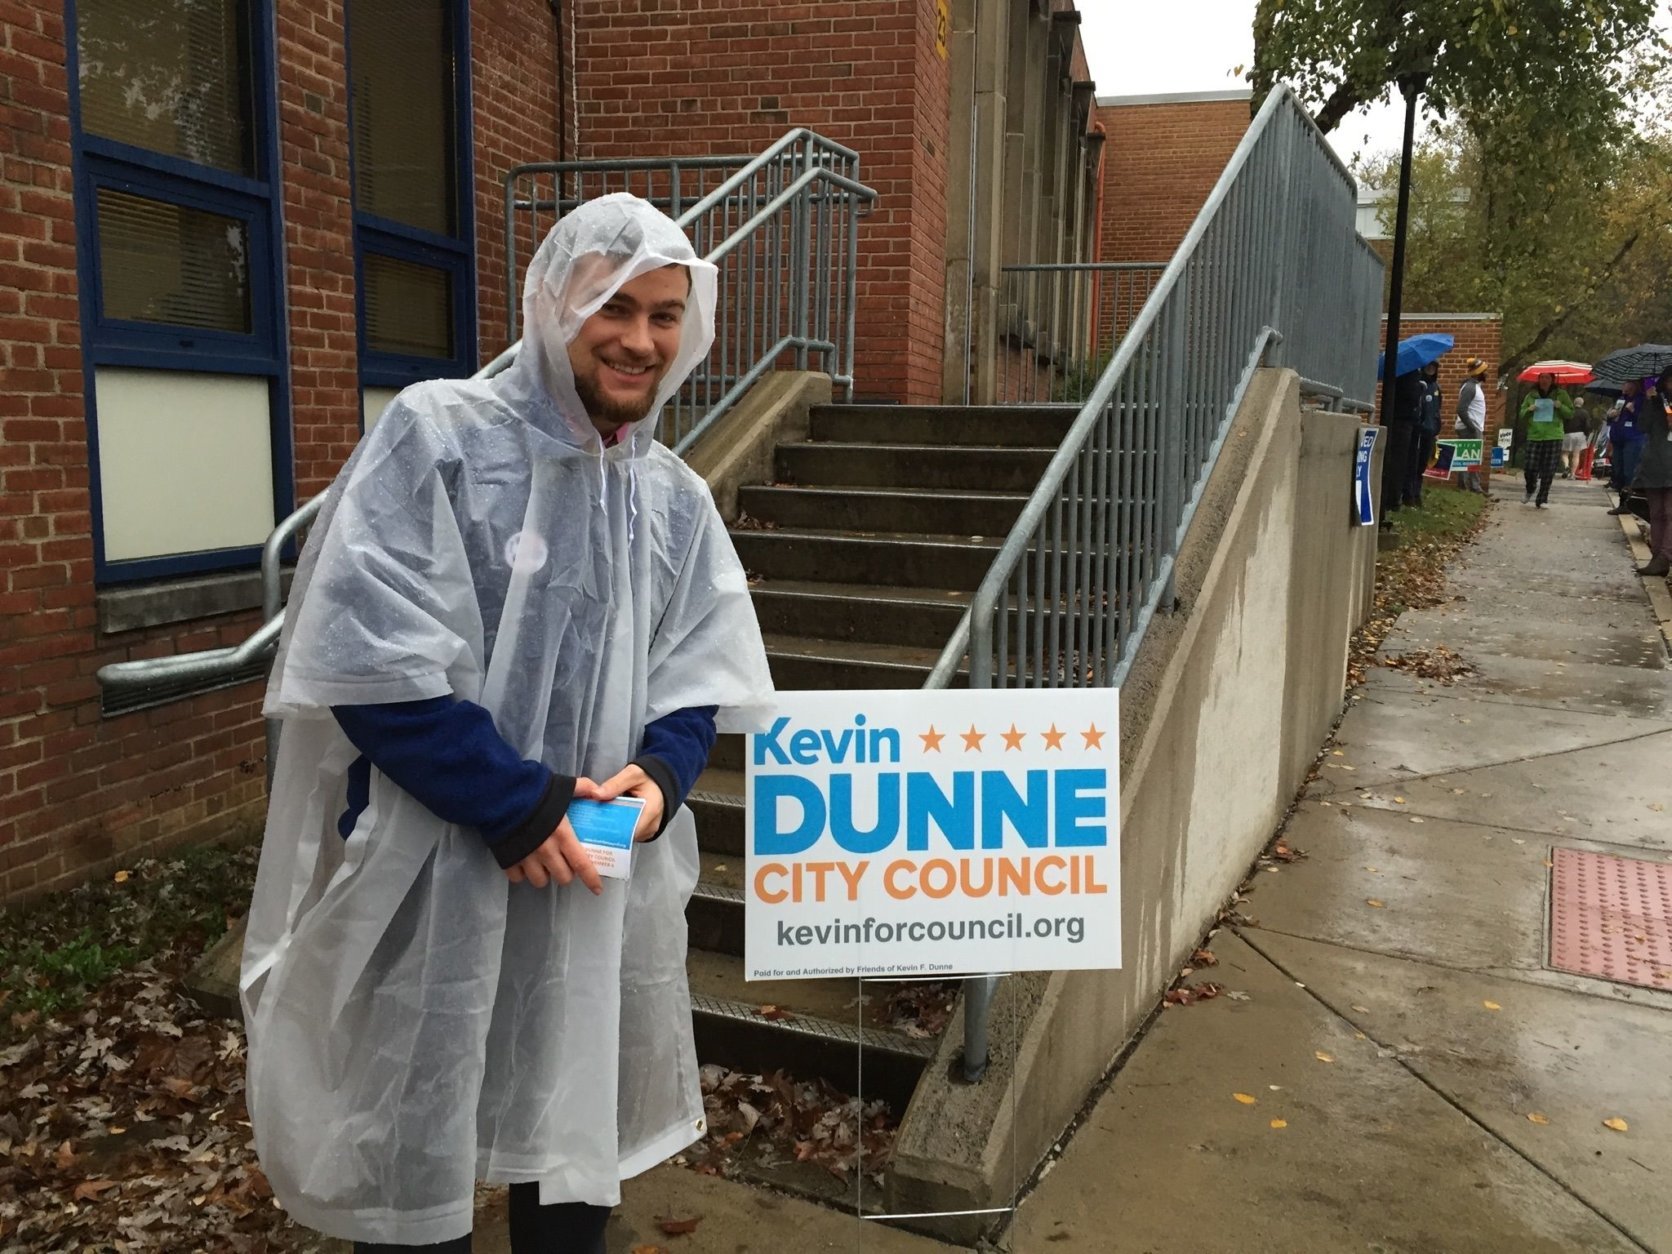 Kevin Dunne, candidate for Alexandria City Council, greets voters in the rain at the MacArthur Precinct in Alexandria, Virginia, on Nov. 6, 2018. (Courtesy Linda App)